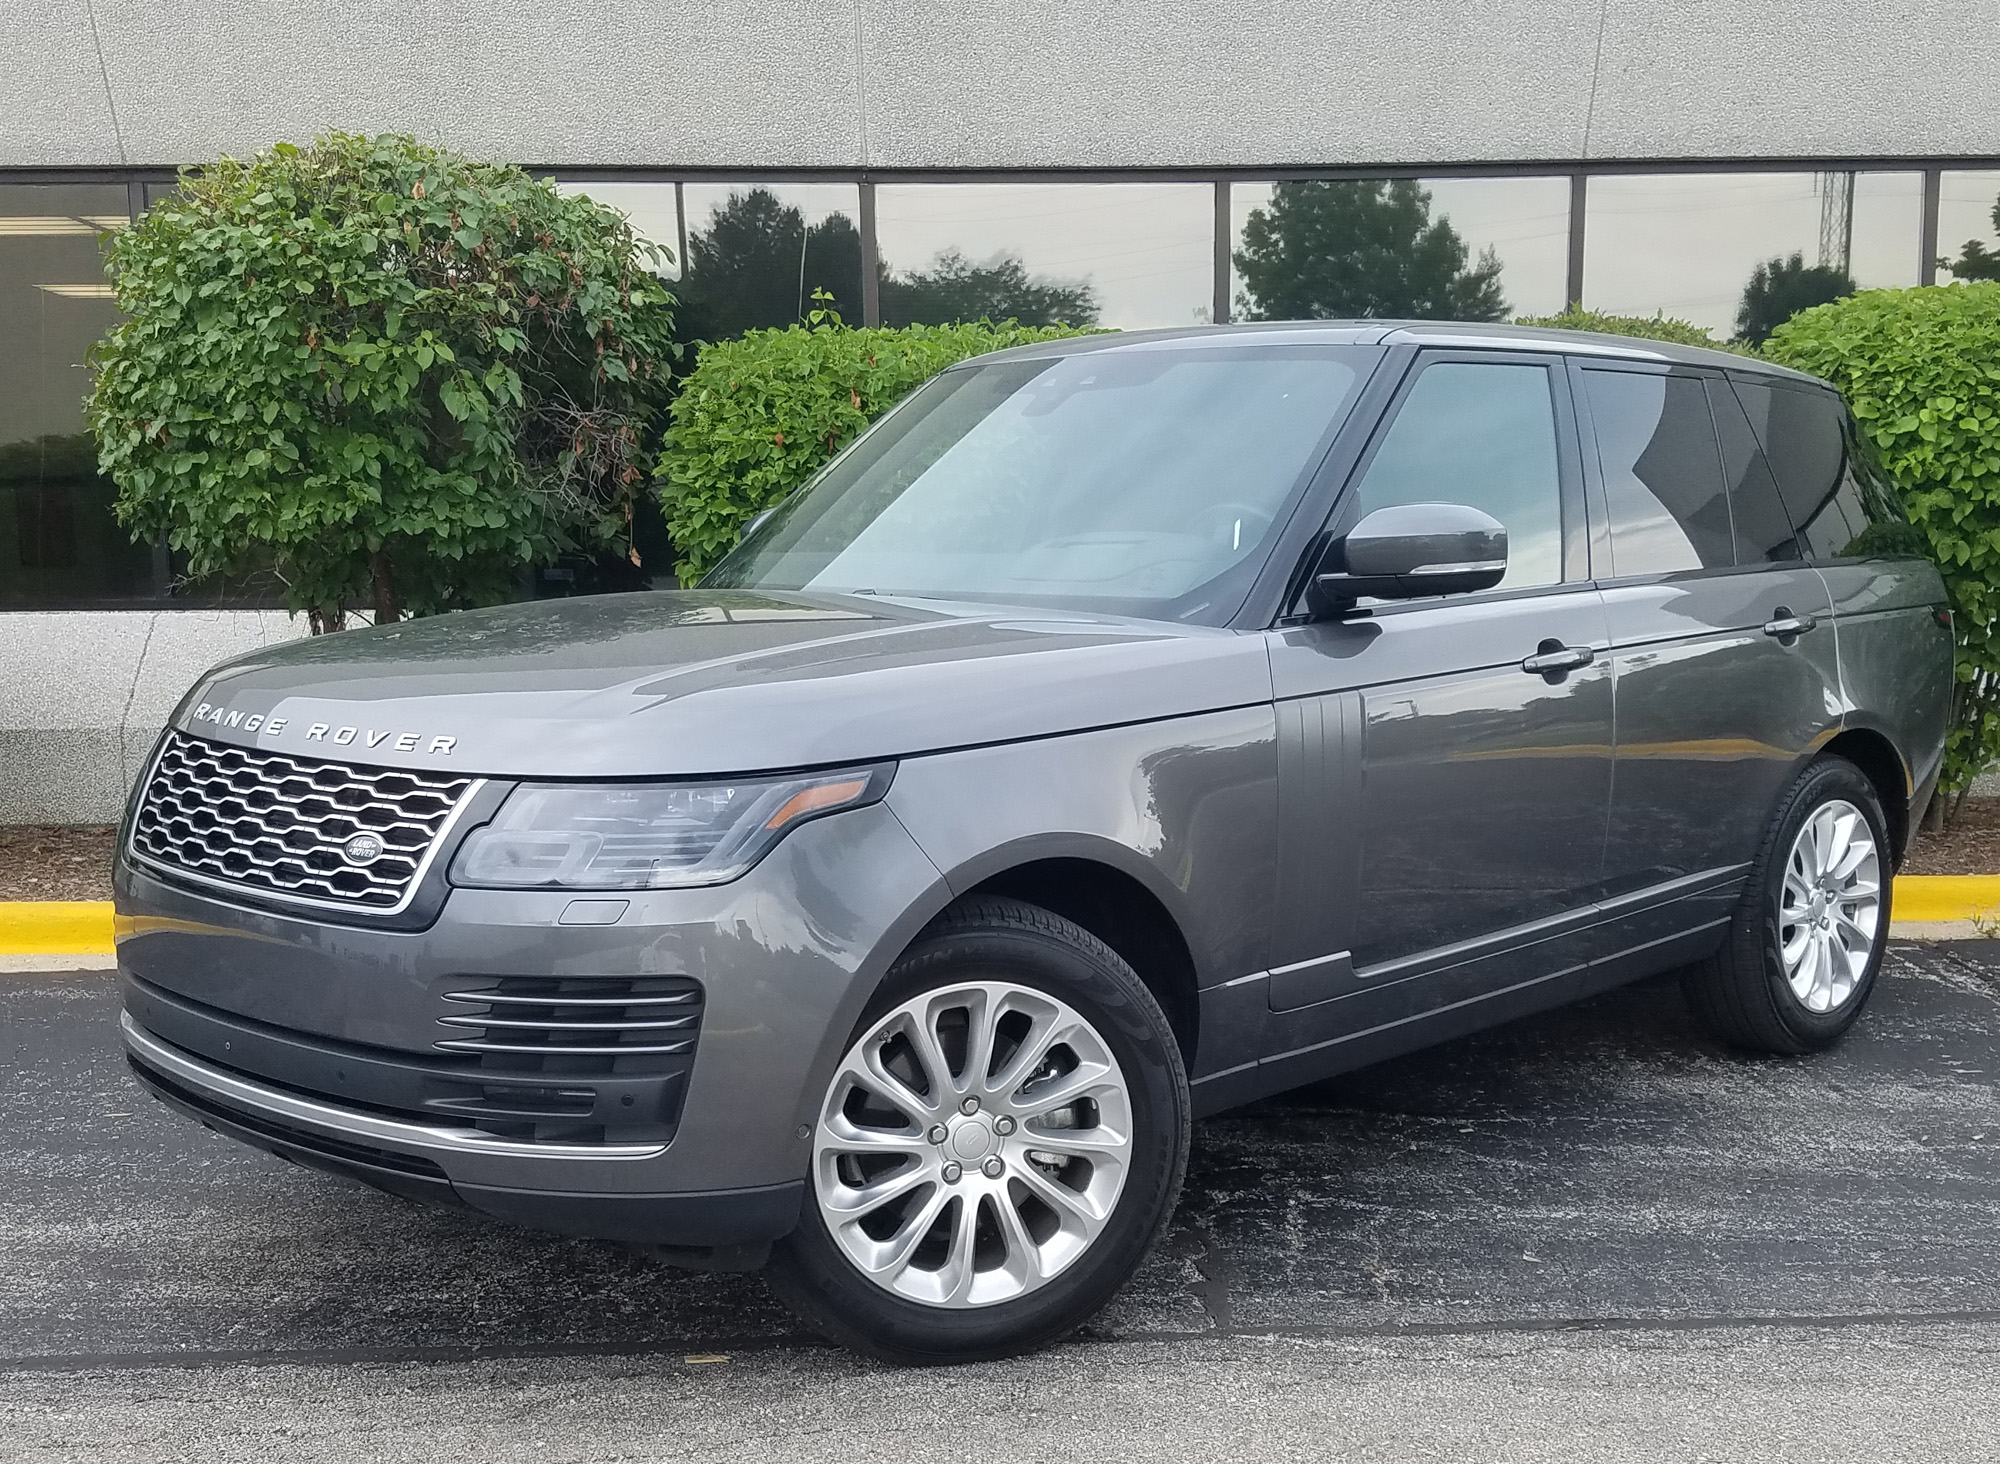 2018 Land Rover Range Rover HSE Td6 The Daily Drive | Consumer Guide®